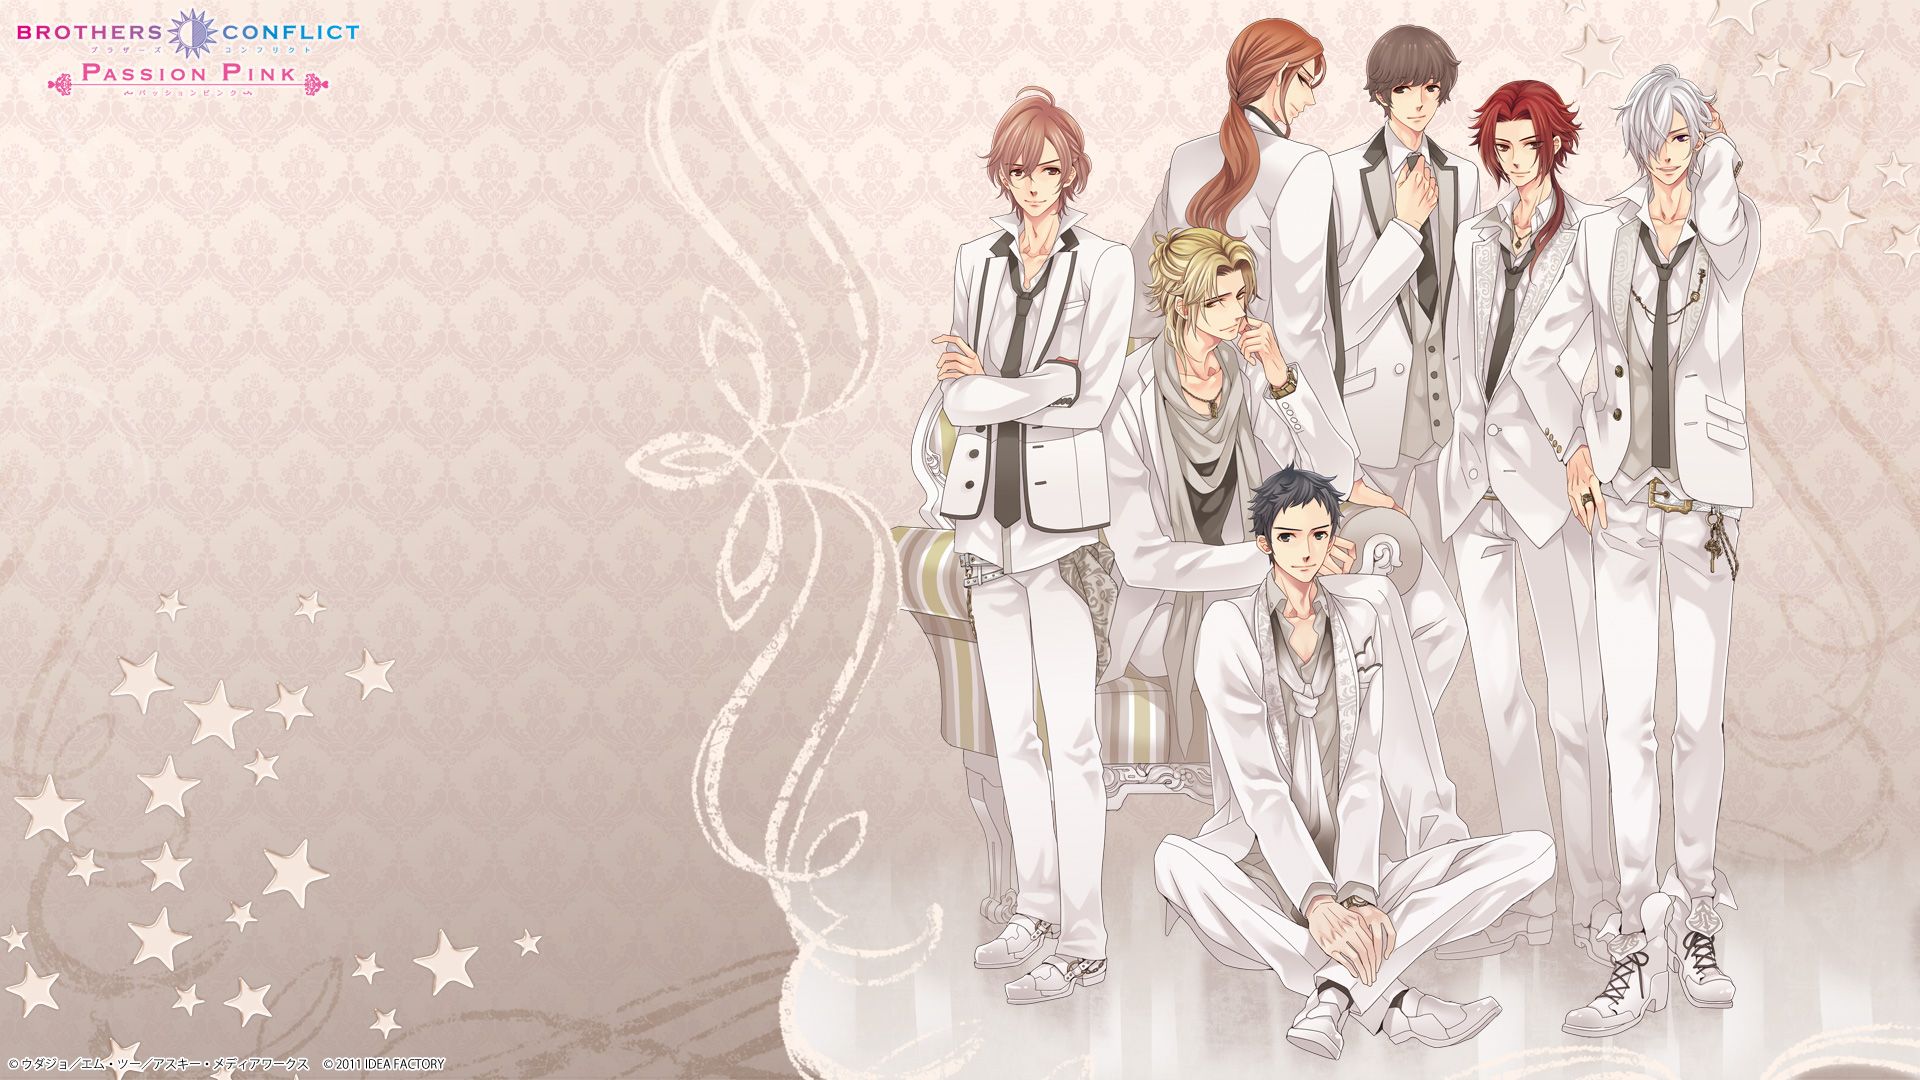 Brothers Conflict ♡ Games ♡ Wallpaper